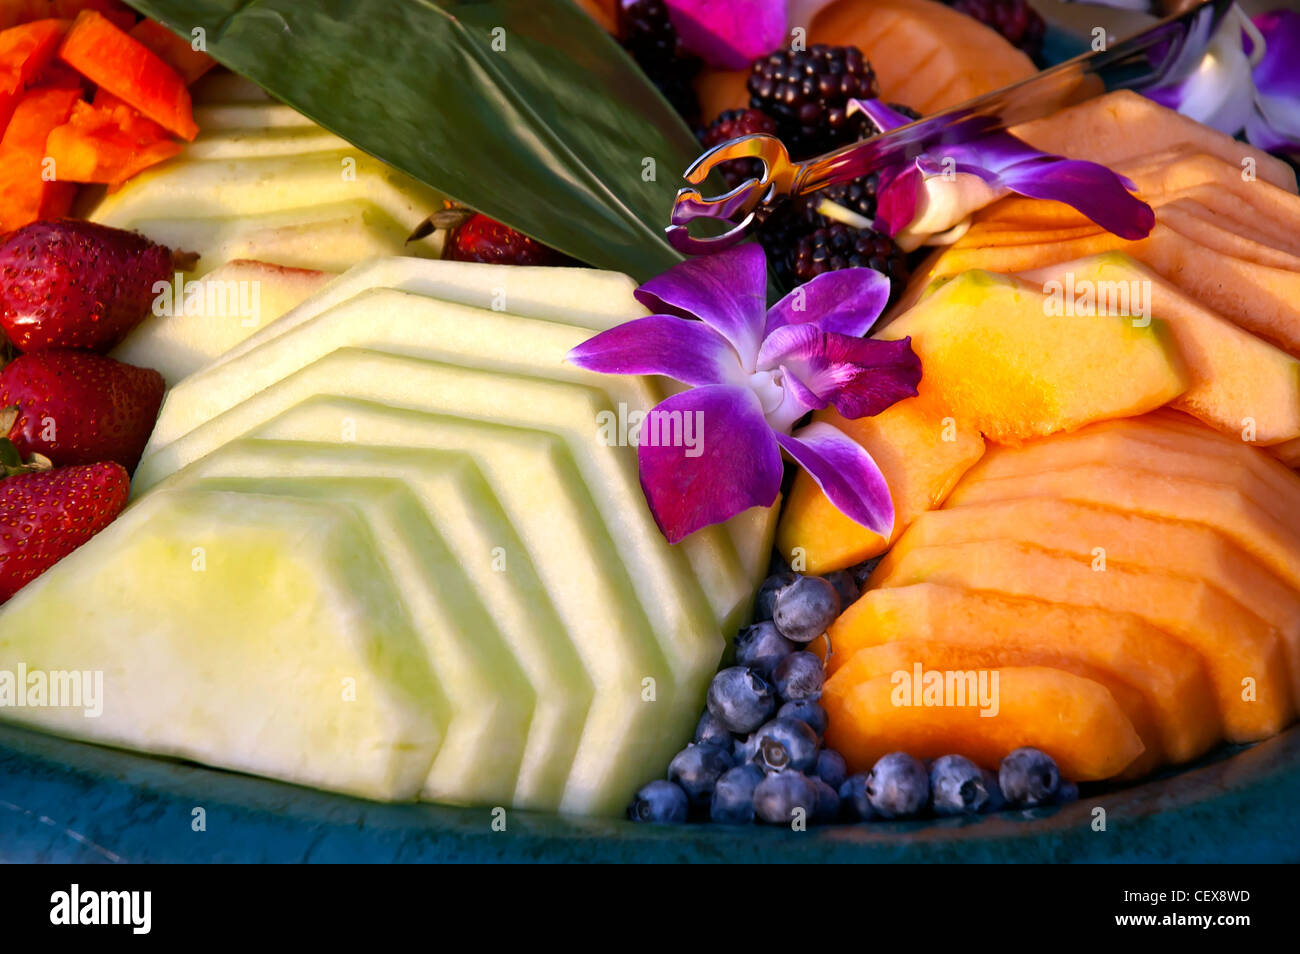 Tray of different seasonal and tropical fruit bright colors decorated with purple orchid blossoms Stock Photo